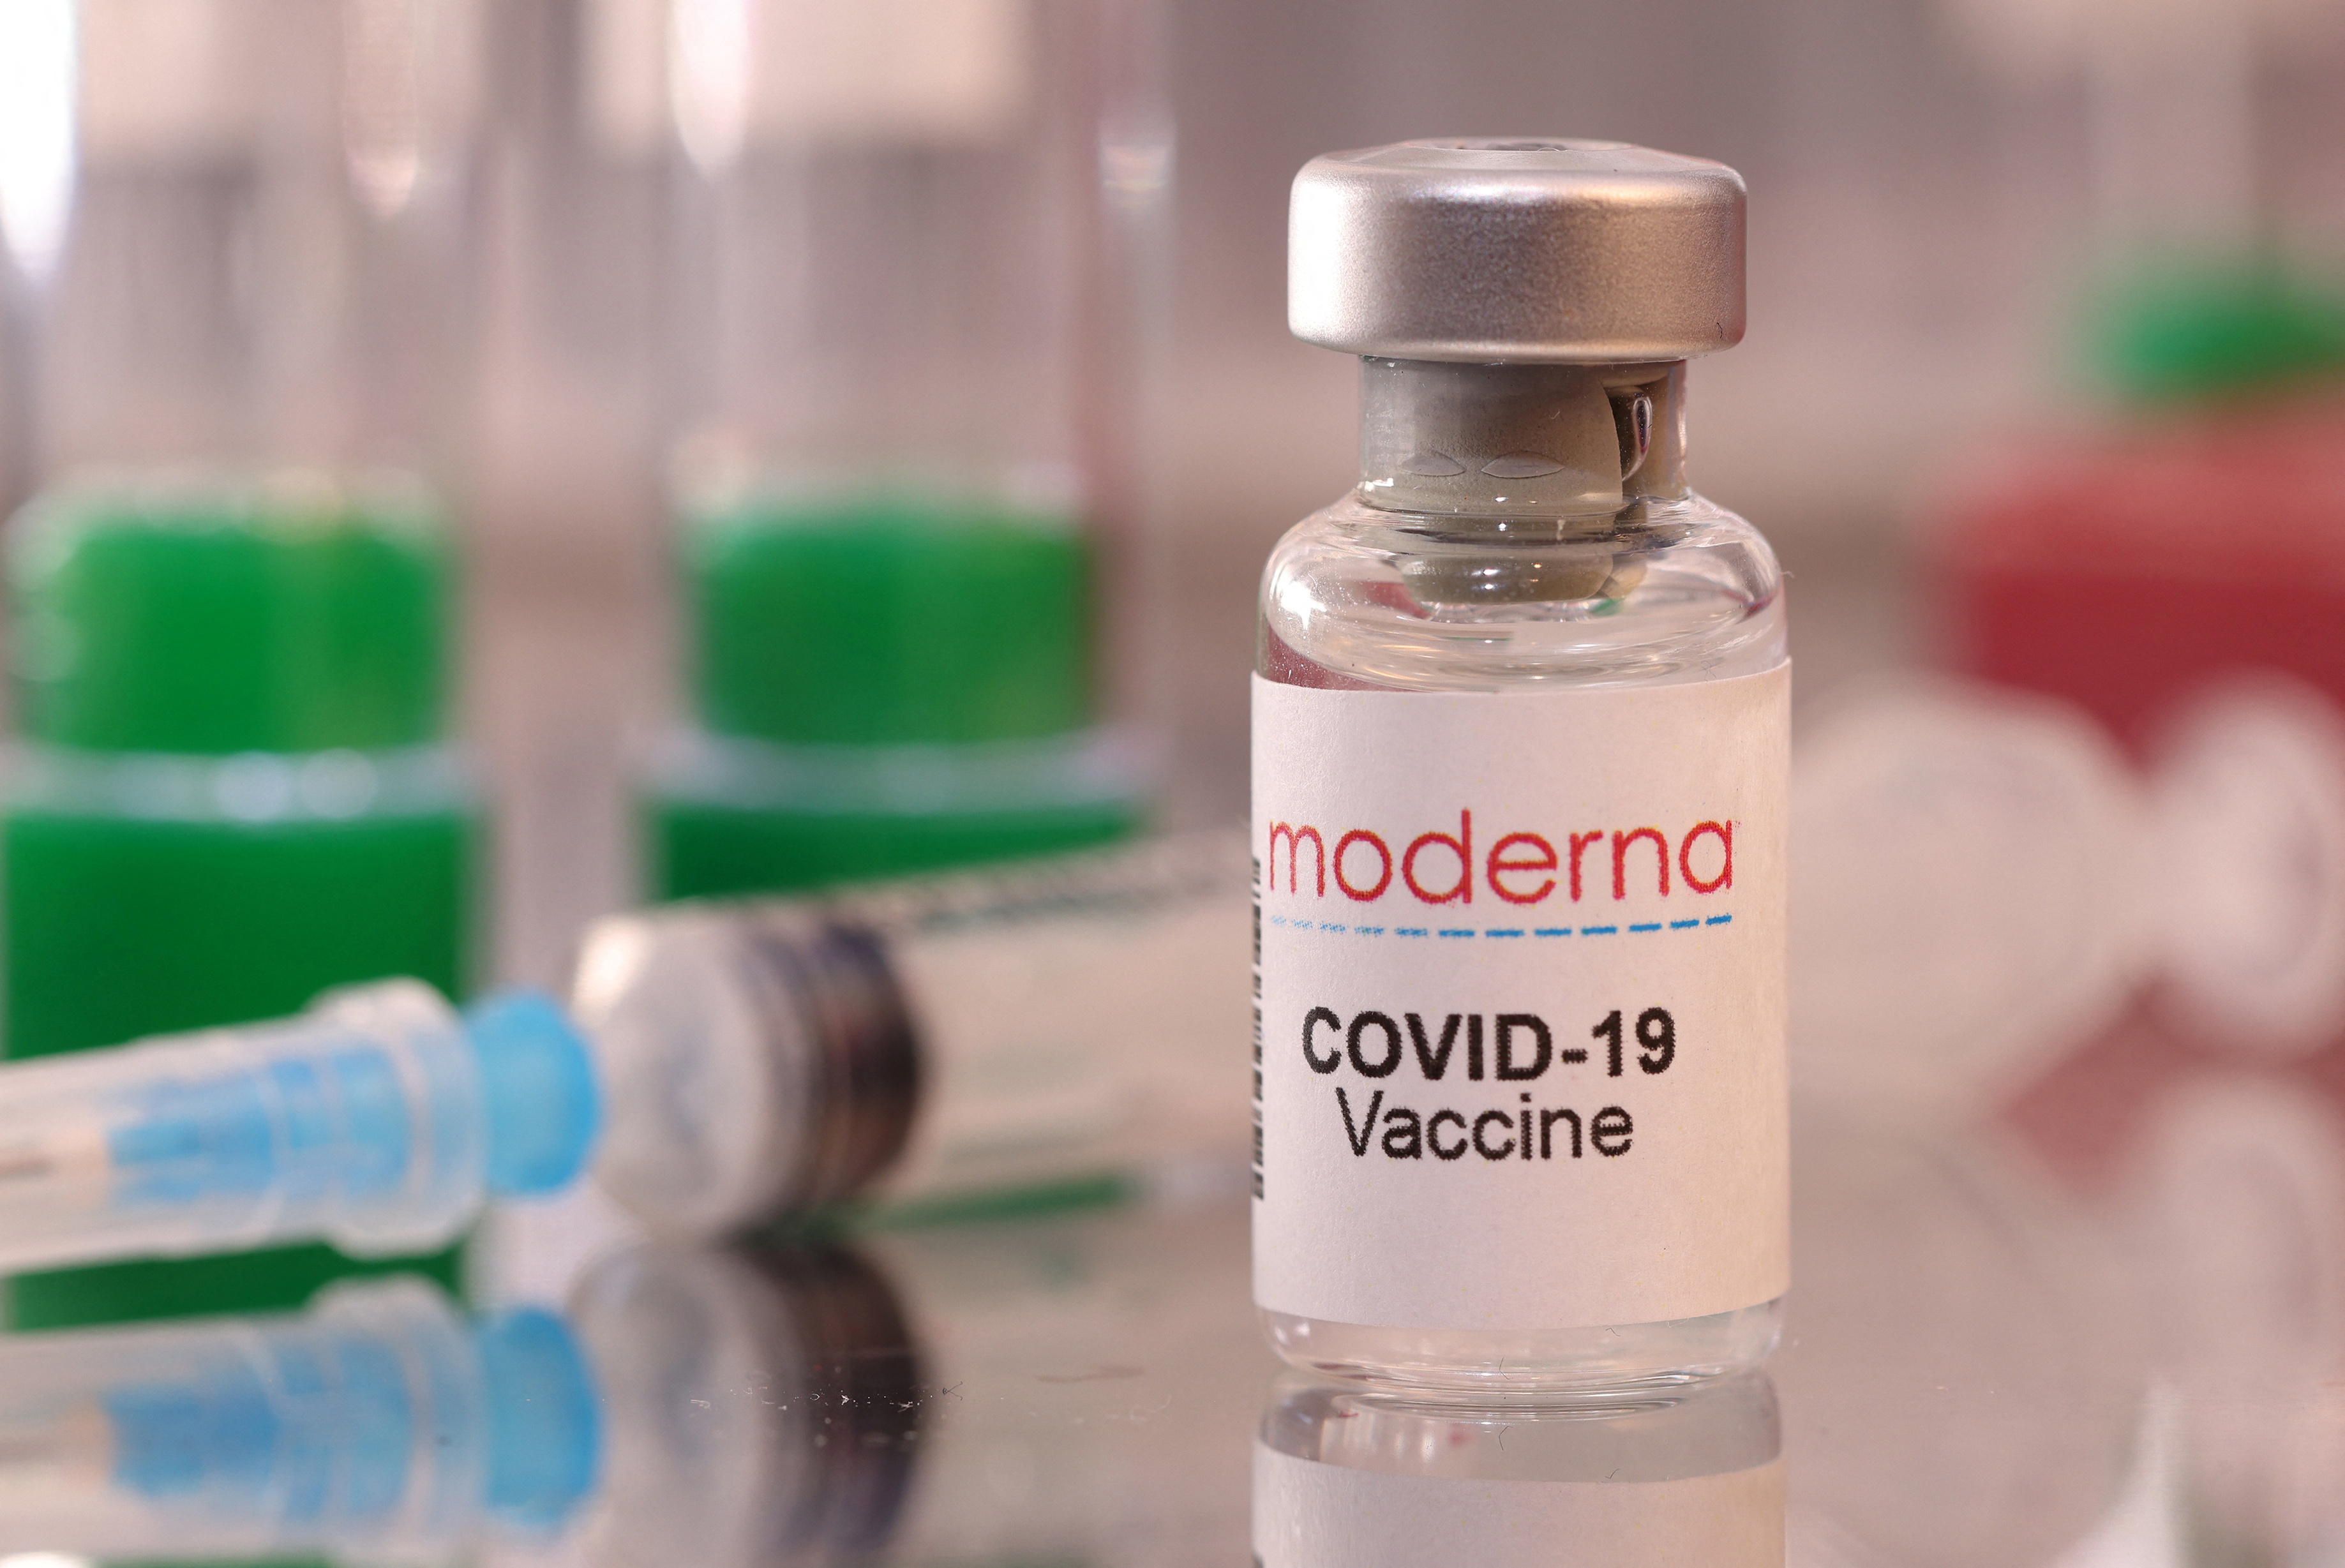 A vial labelled "Moderna COVID-19 Vaccine" is seen in this illustration taken January 16, 2022. REUTERS/Dado Ruvic/Illustration